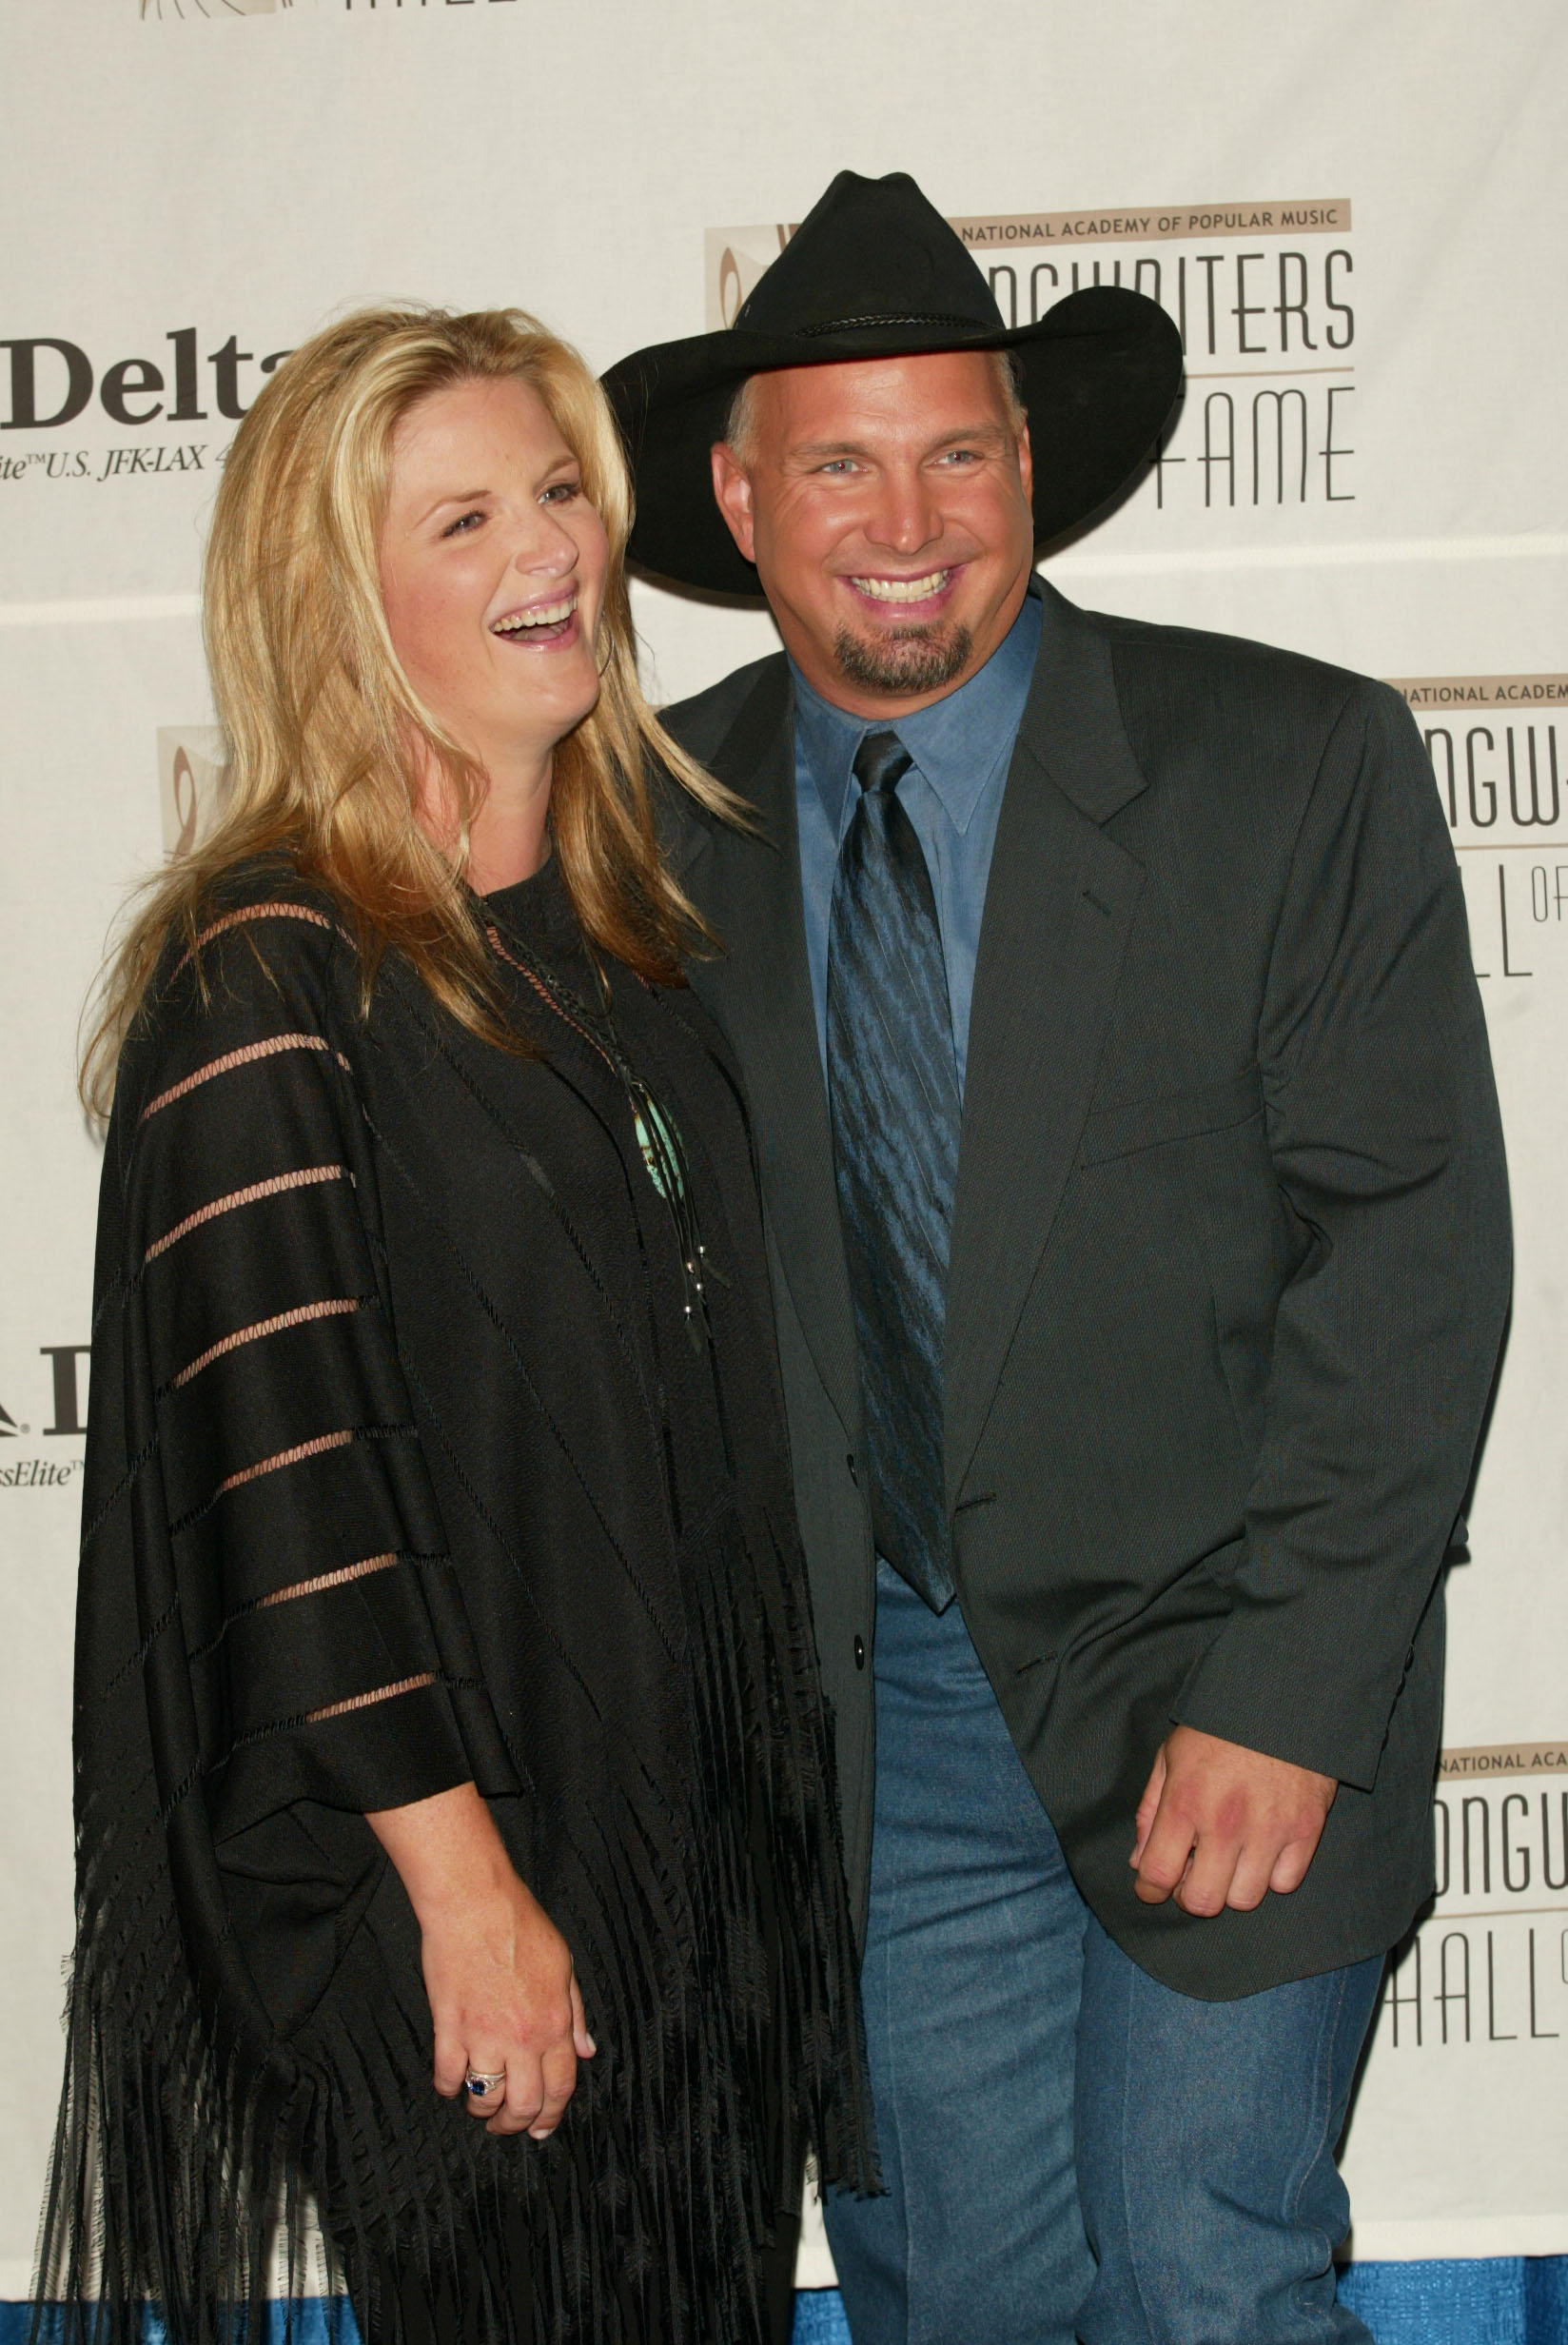 Singer Trisha Yearwood Garth Brooks at The Sheraton New York Hotel on June 13 2002 in New York City | Source: Getty Images